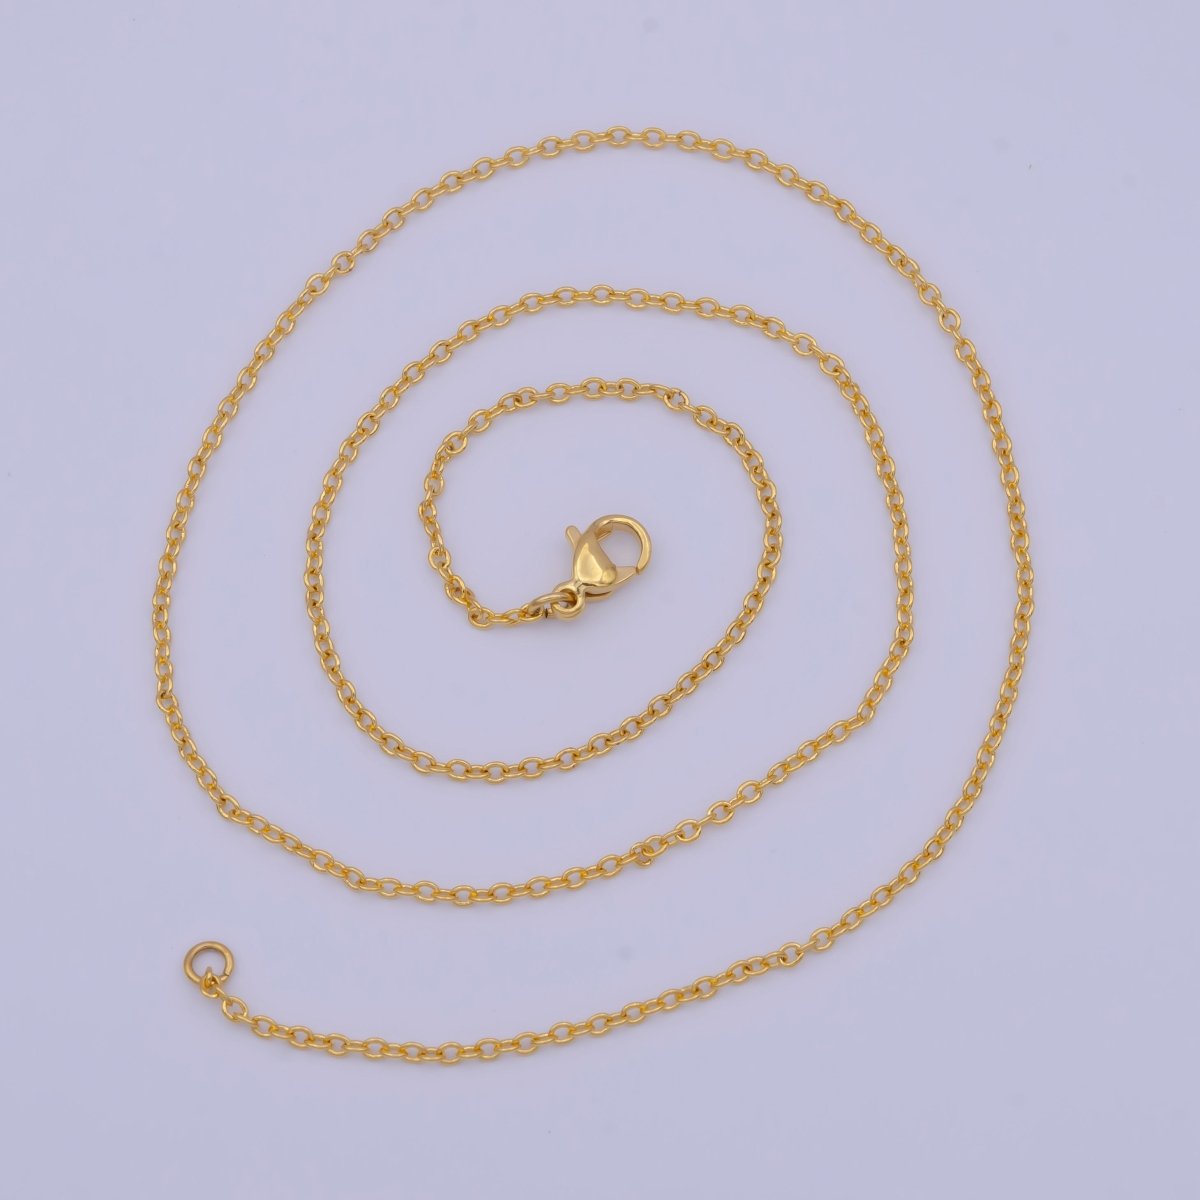 Dainty 24K Gold Filled Cable Chain Necklace Gold Link Chain Necklace Ready to Wear 17.5 Inch | WA-1148 Clearance Pricing - DLUXCA